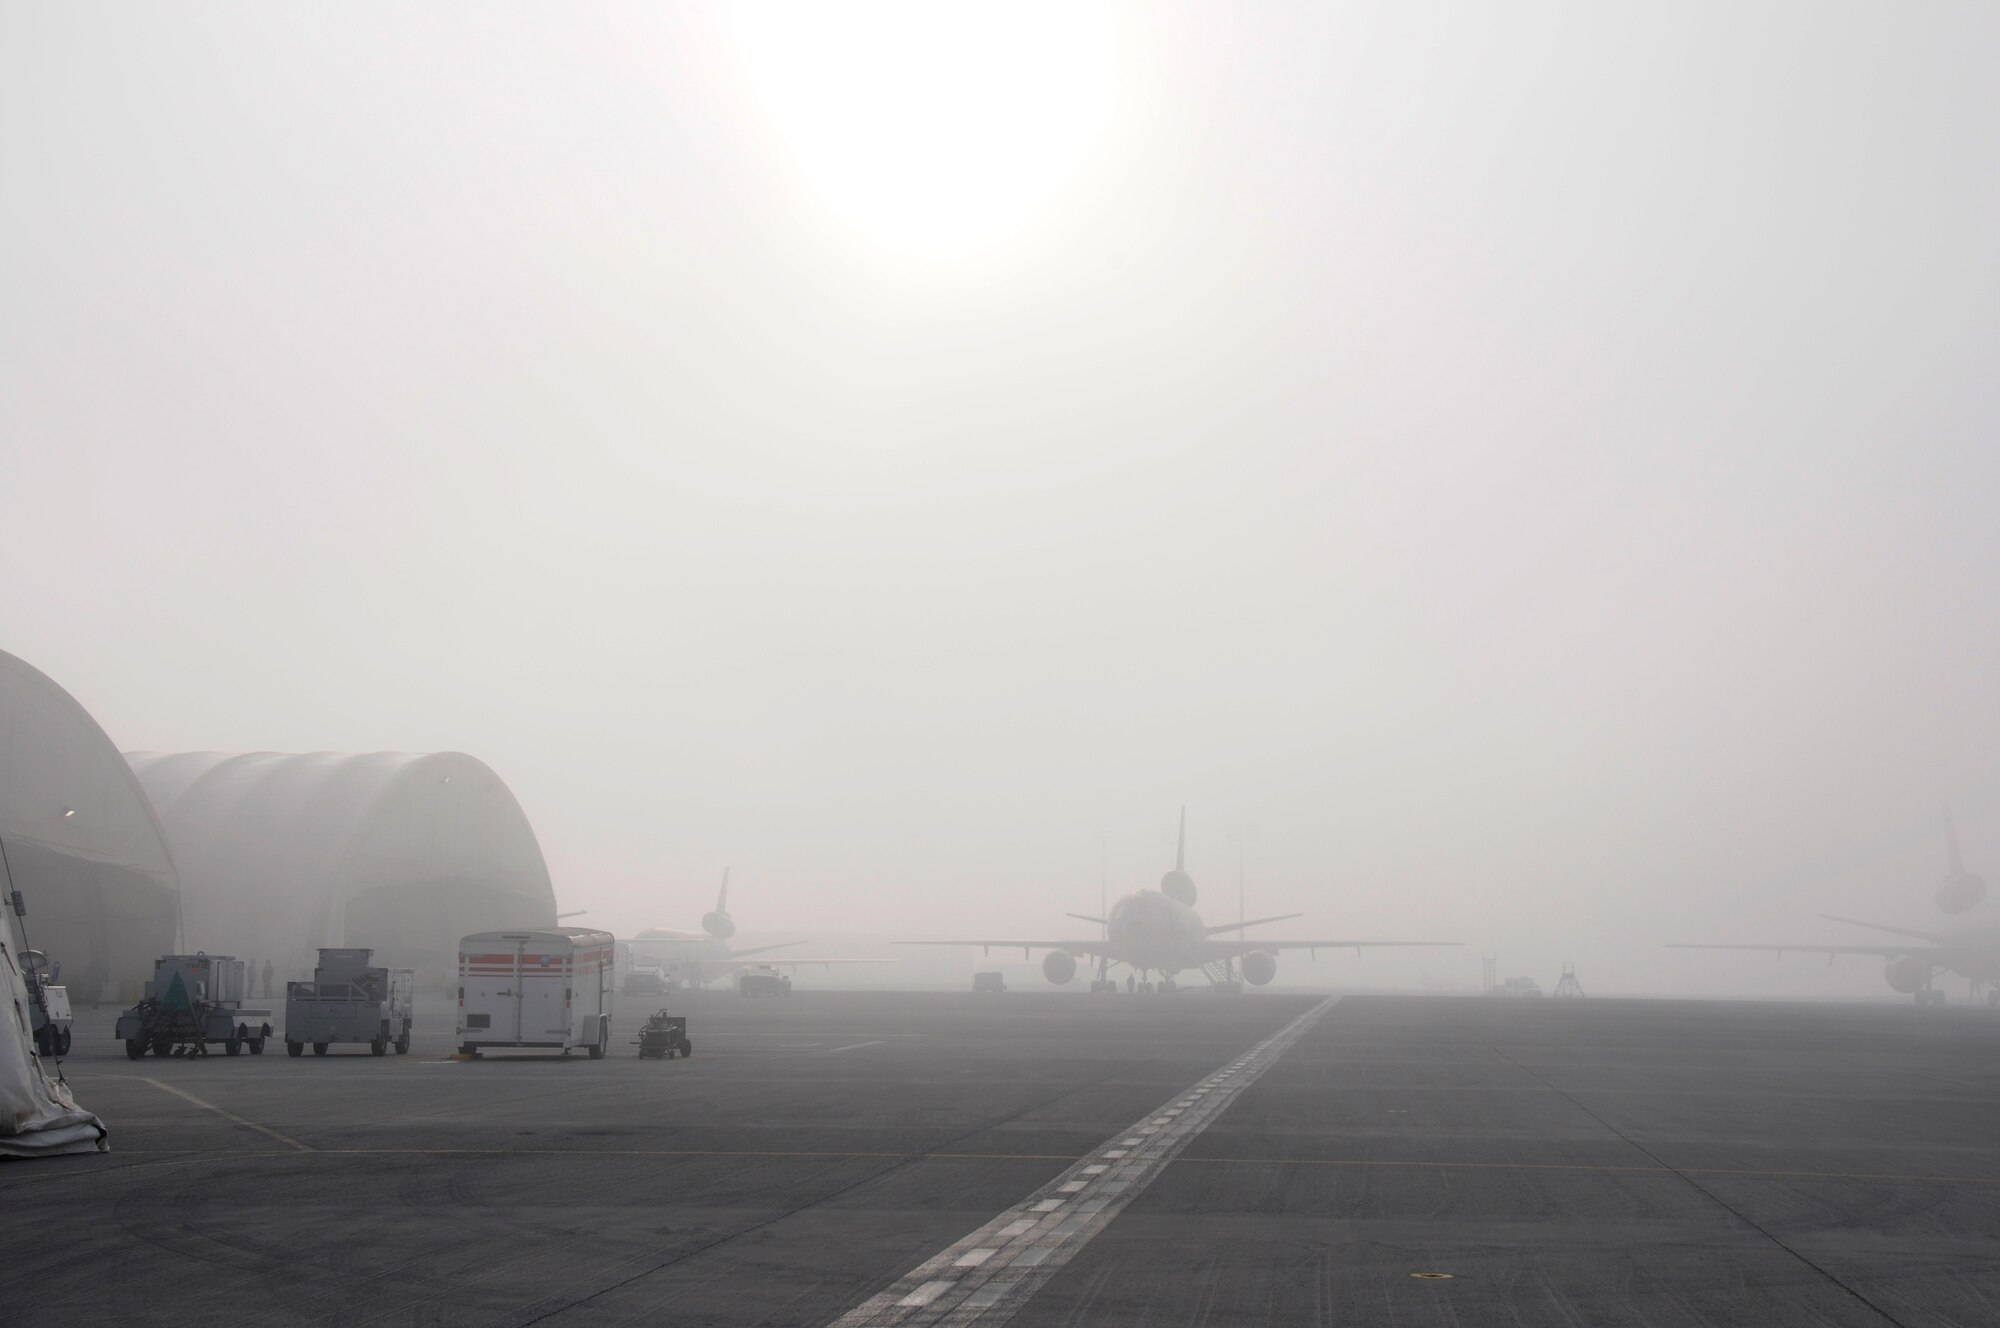 SOUTHWEST ASIA - A KC-10 Extender sits on the flightline at the 380th Air Expeditionary Wing as the sun breaks through on a foggy morning, Jan 28. The 380th AEW stands mission ready no matter the weather conditions. (U.S. Air Force photo by Senior Airman Brian J. Ellis) (Released)